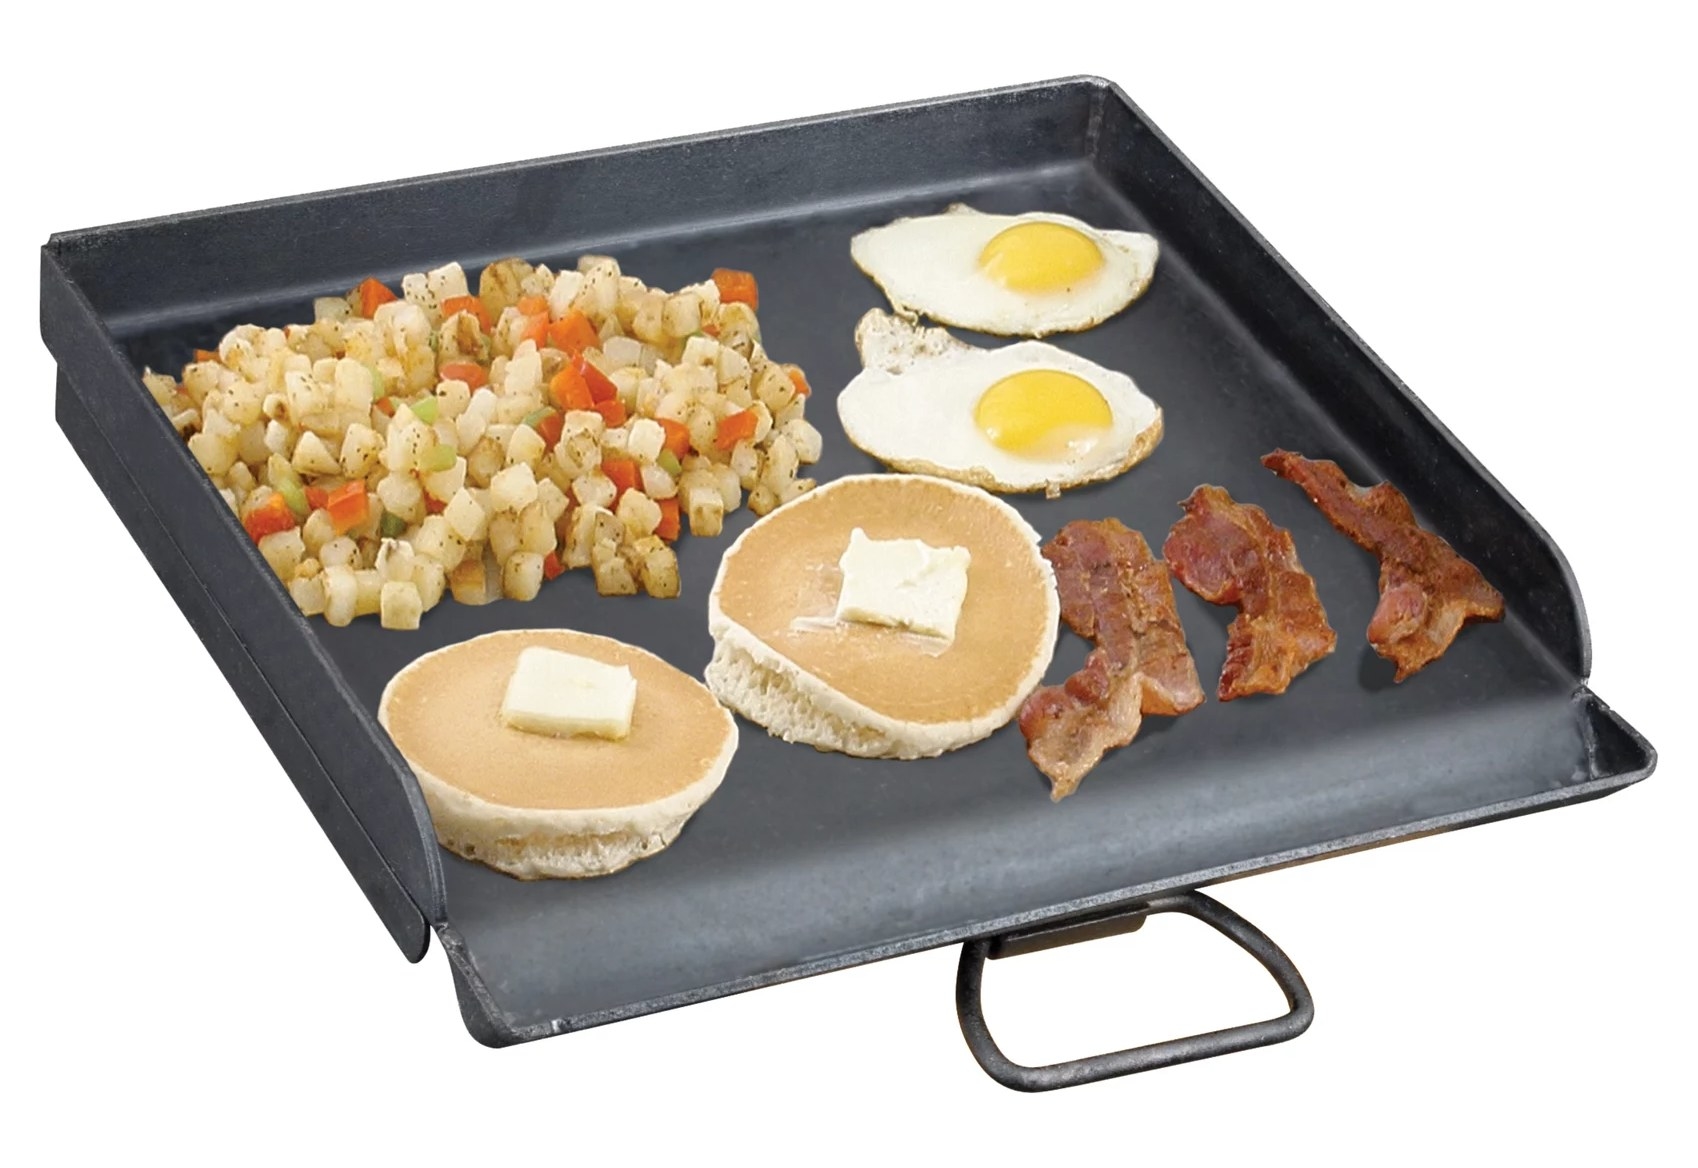 The griddle with pancakes, bacon, eggs, and potatoes